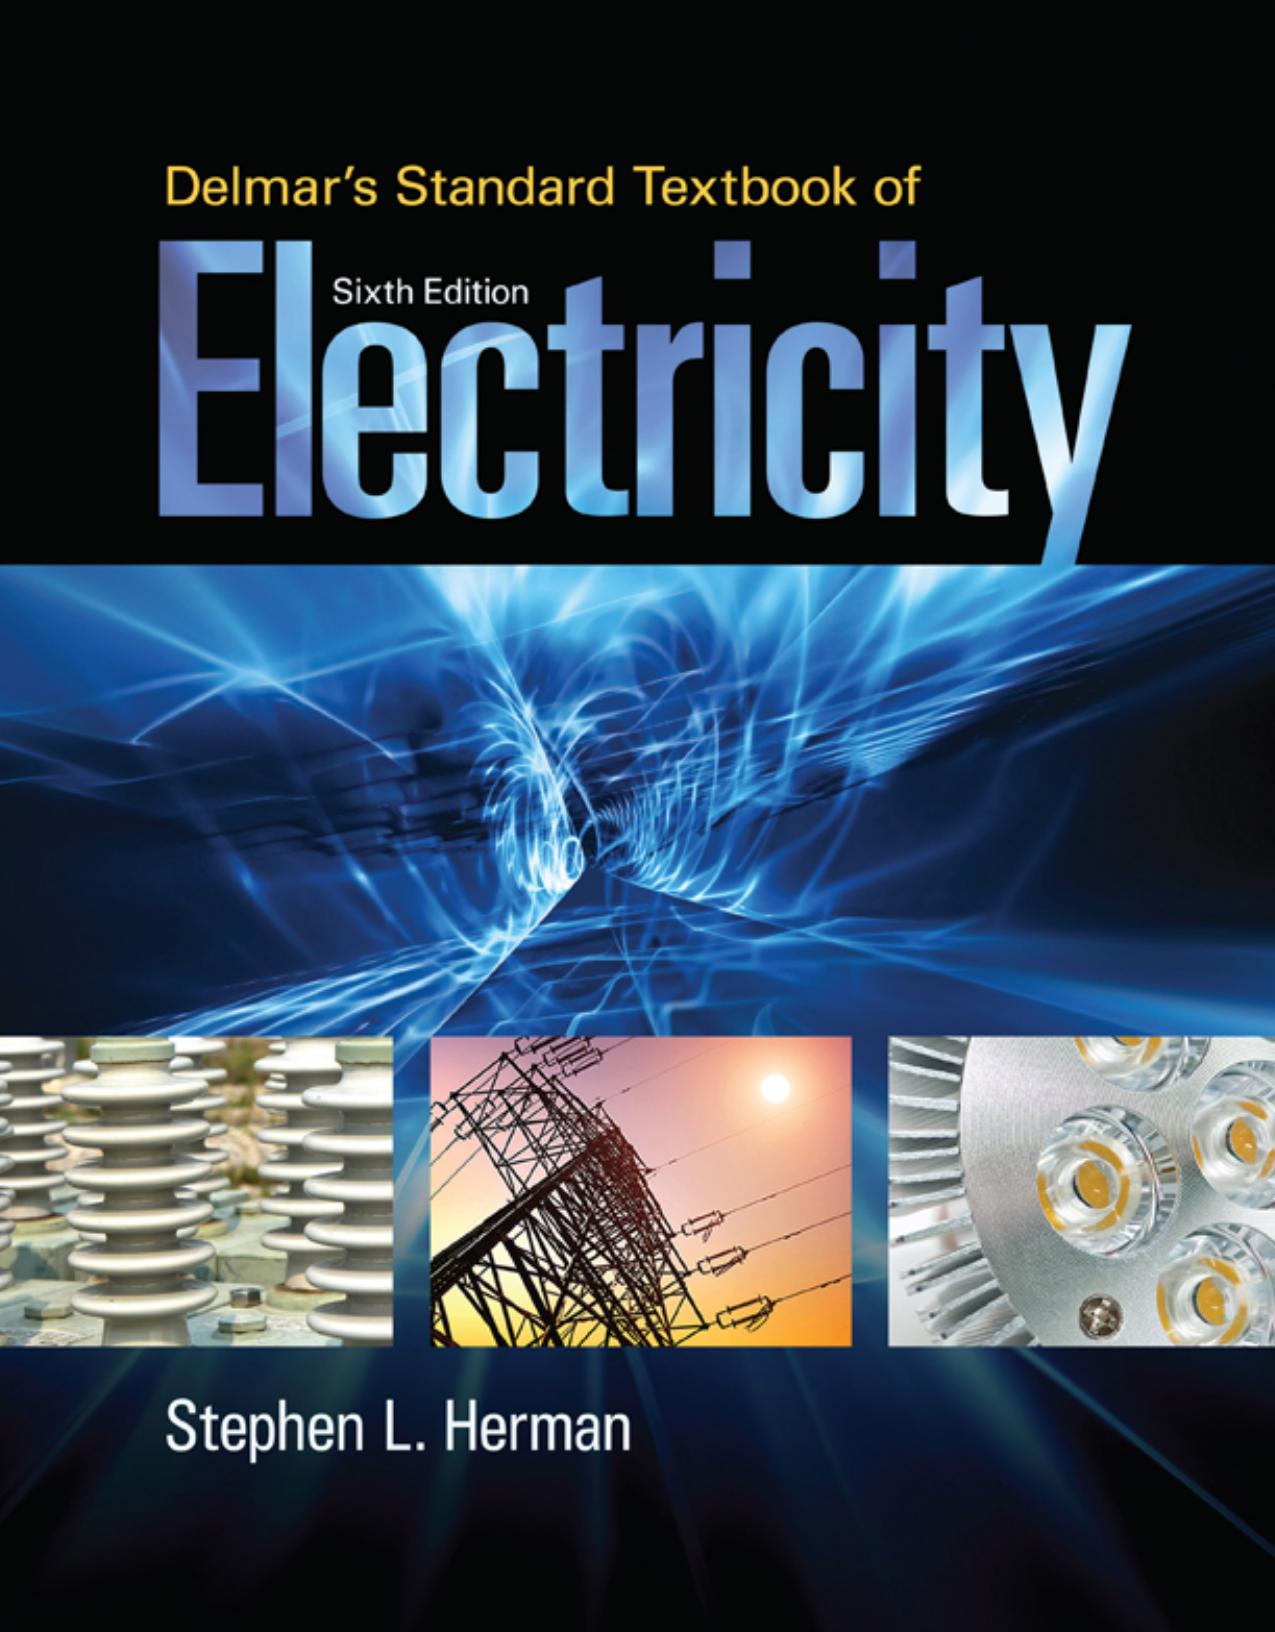 Delmar's Standard Textbook of Electricity 6th Edition.jpg